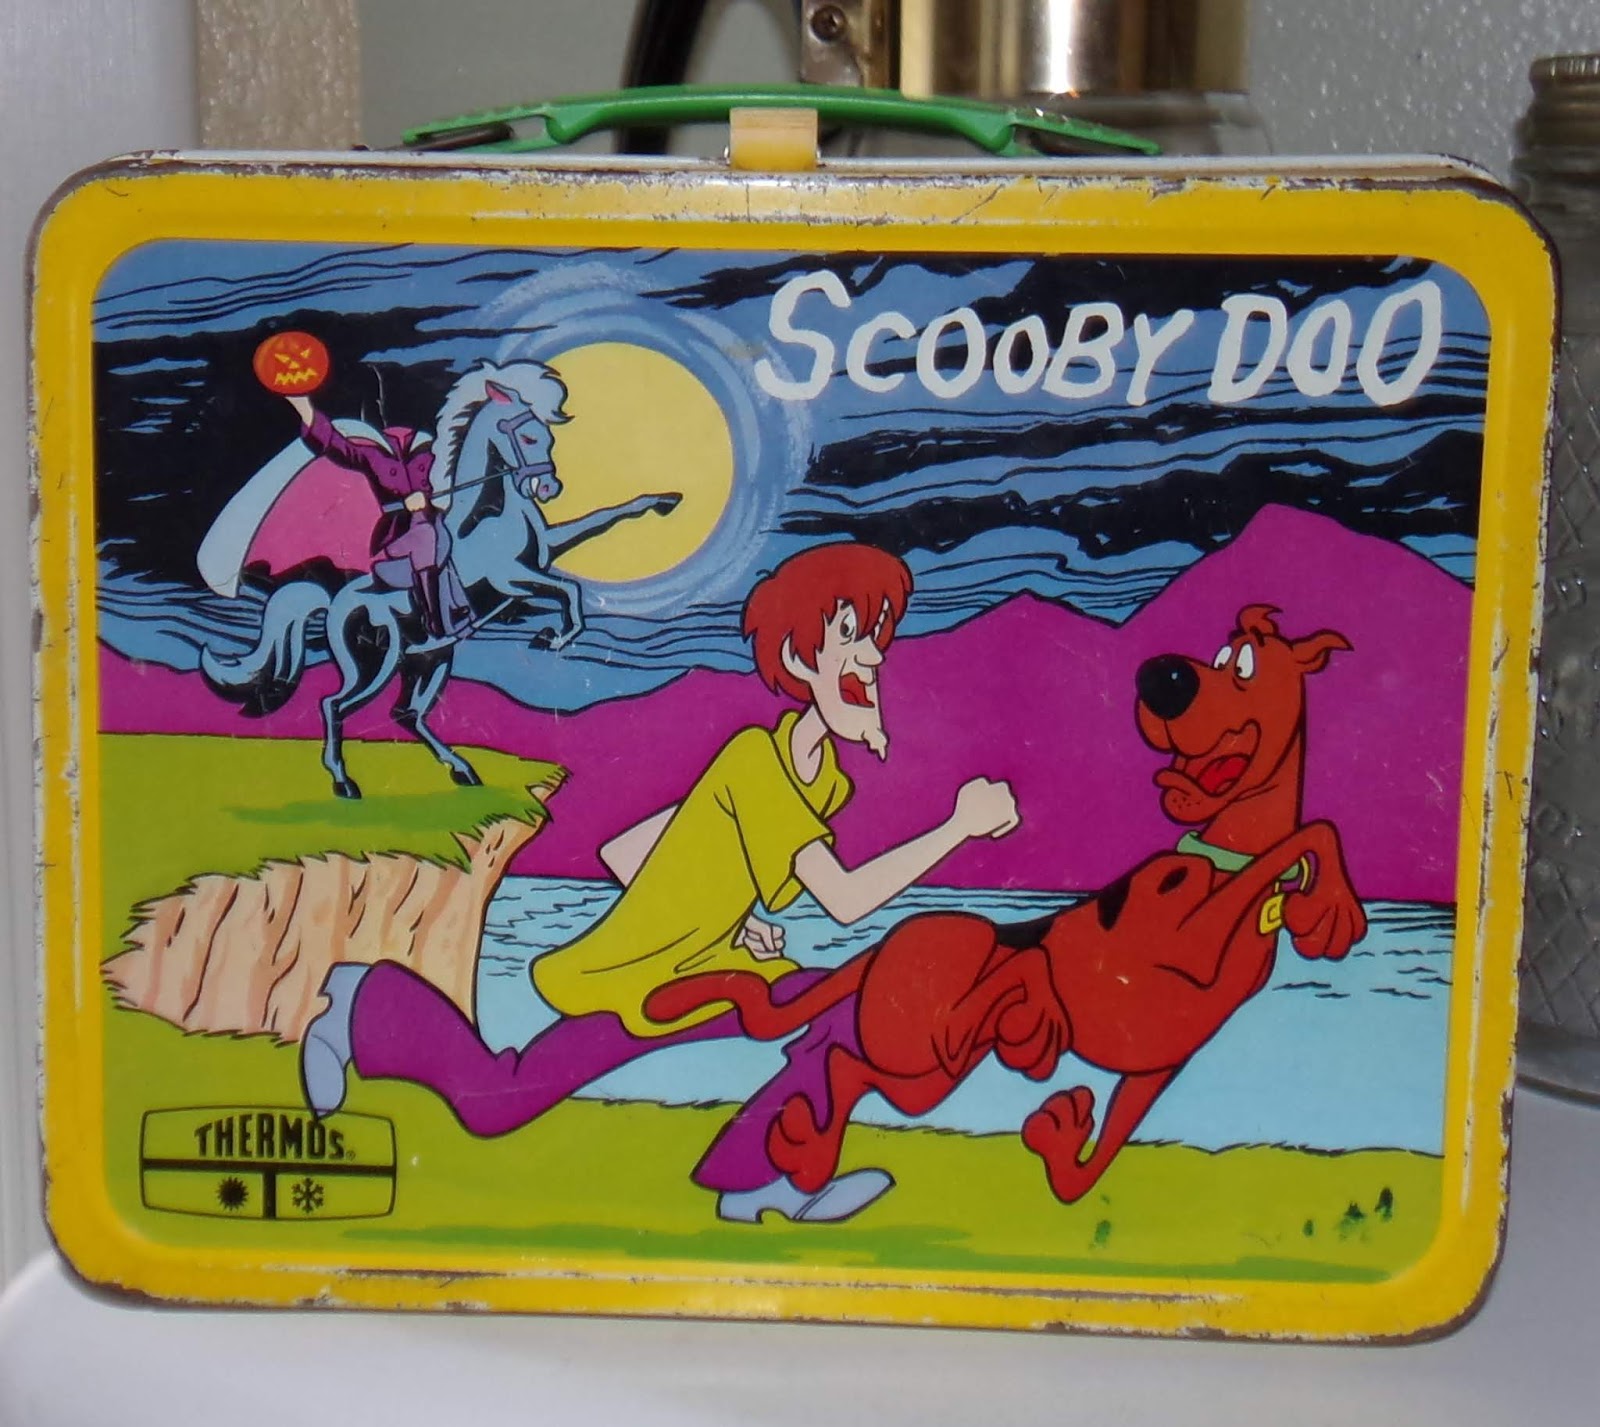 Garage Sale Finds: Scooby Doo Lunchbox, Where Are You?